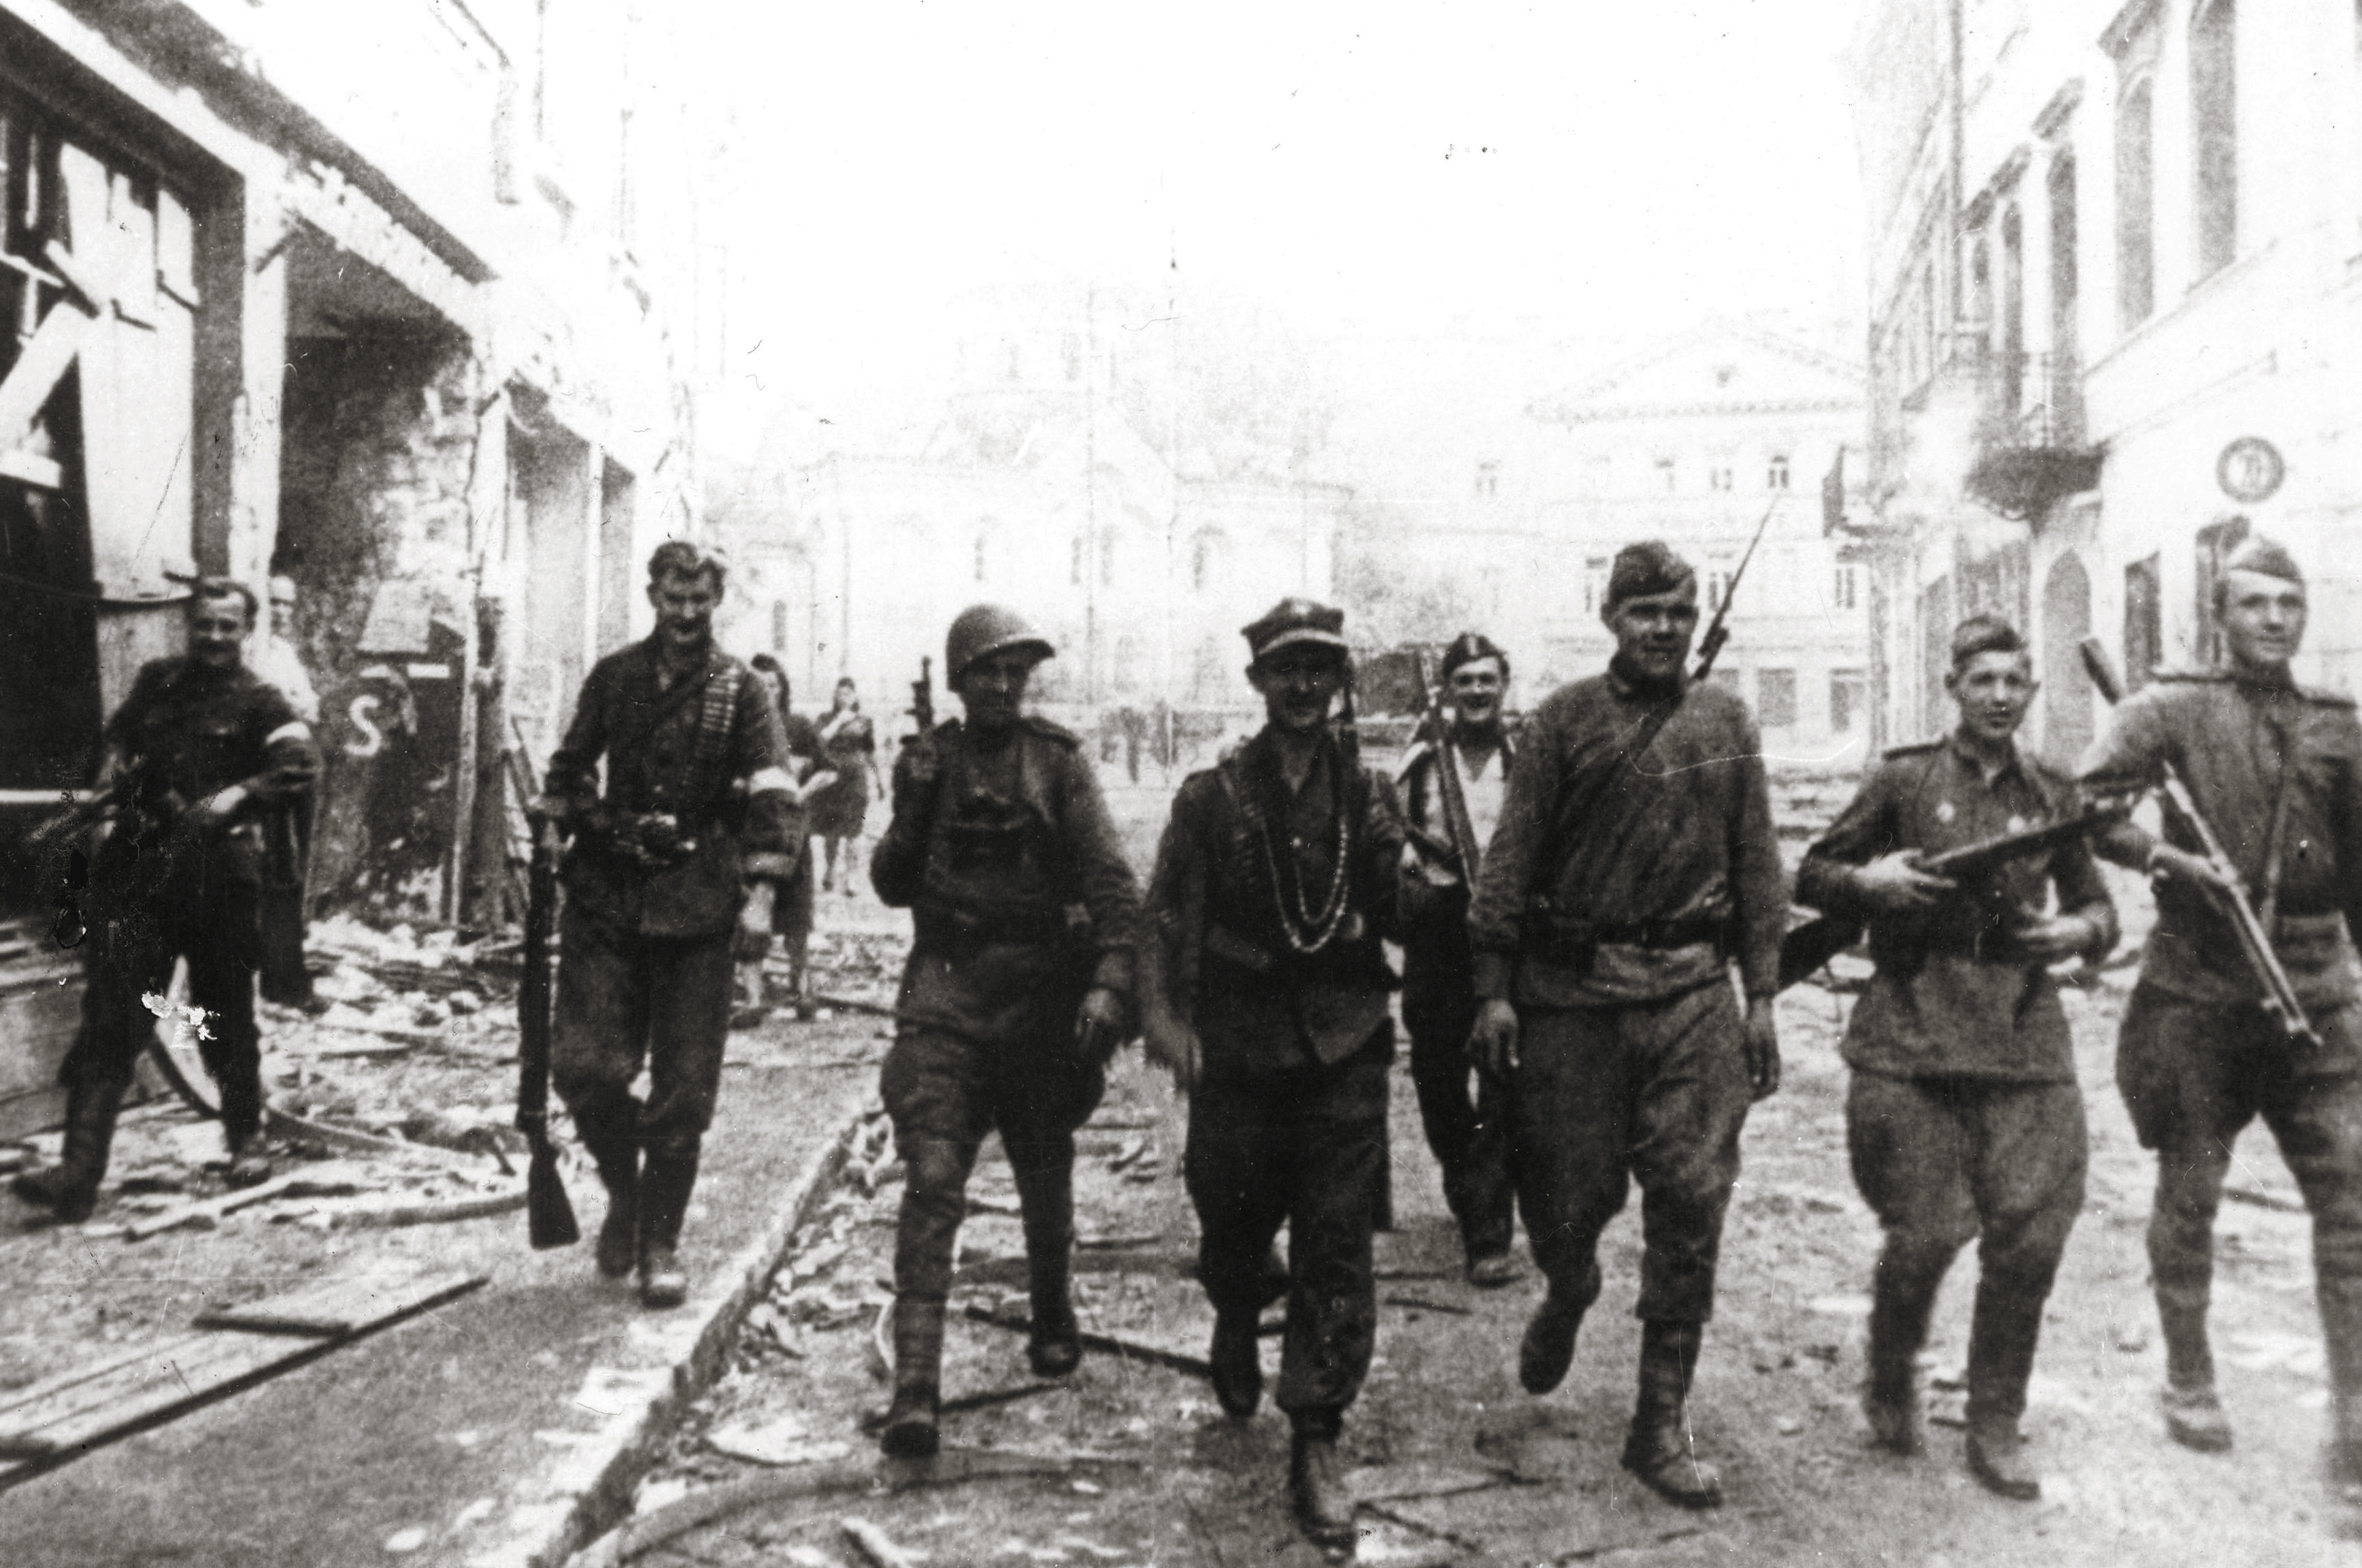 Soviet and Home Army soldiers patrol together in Vilnius, July 1944.